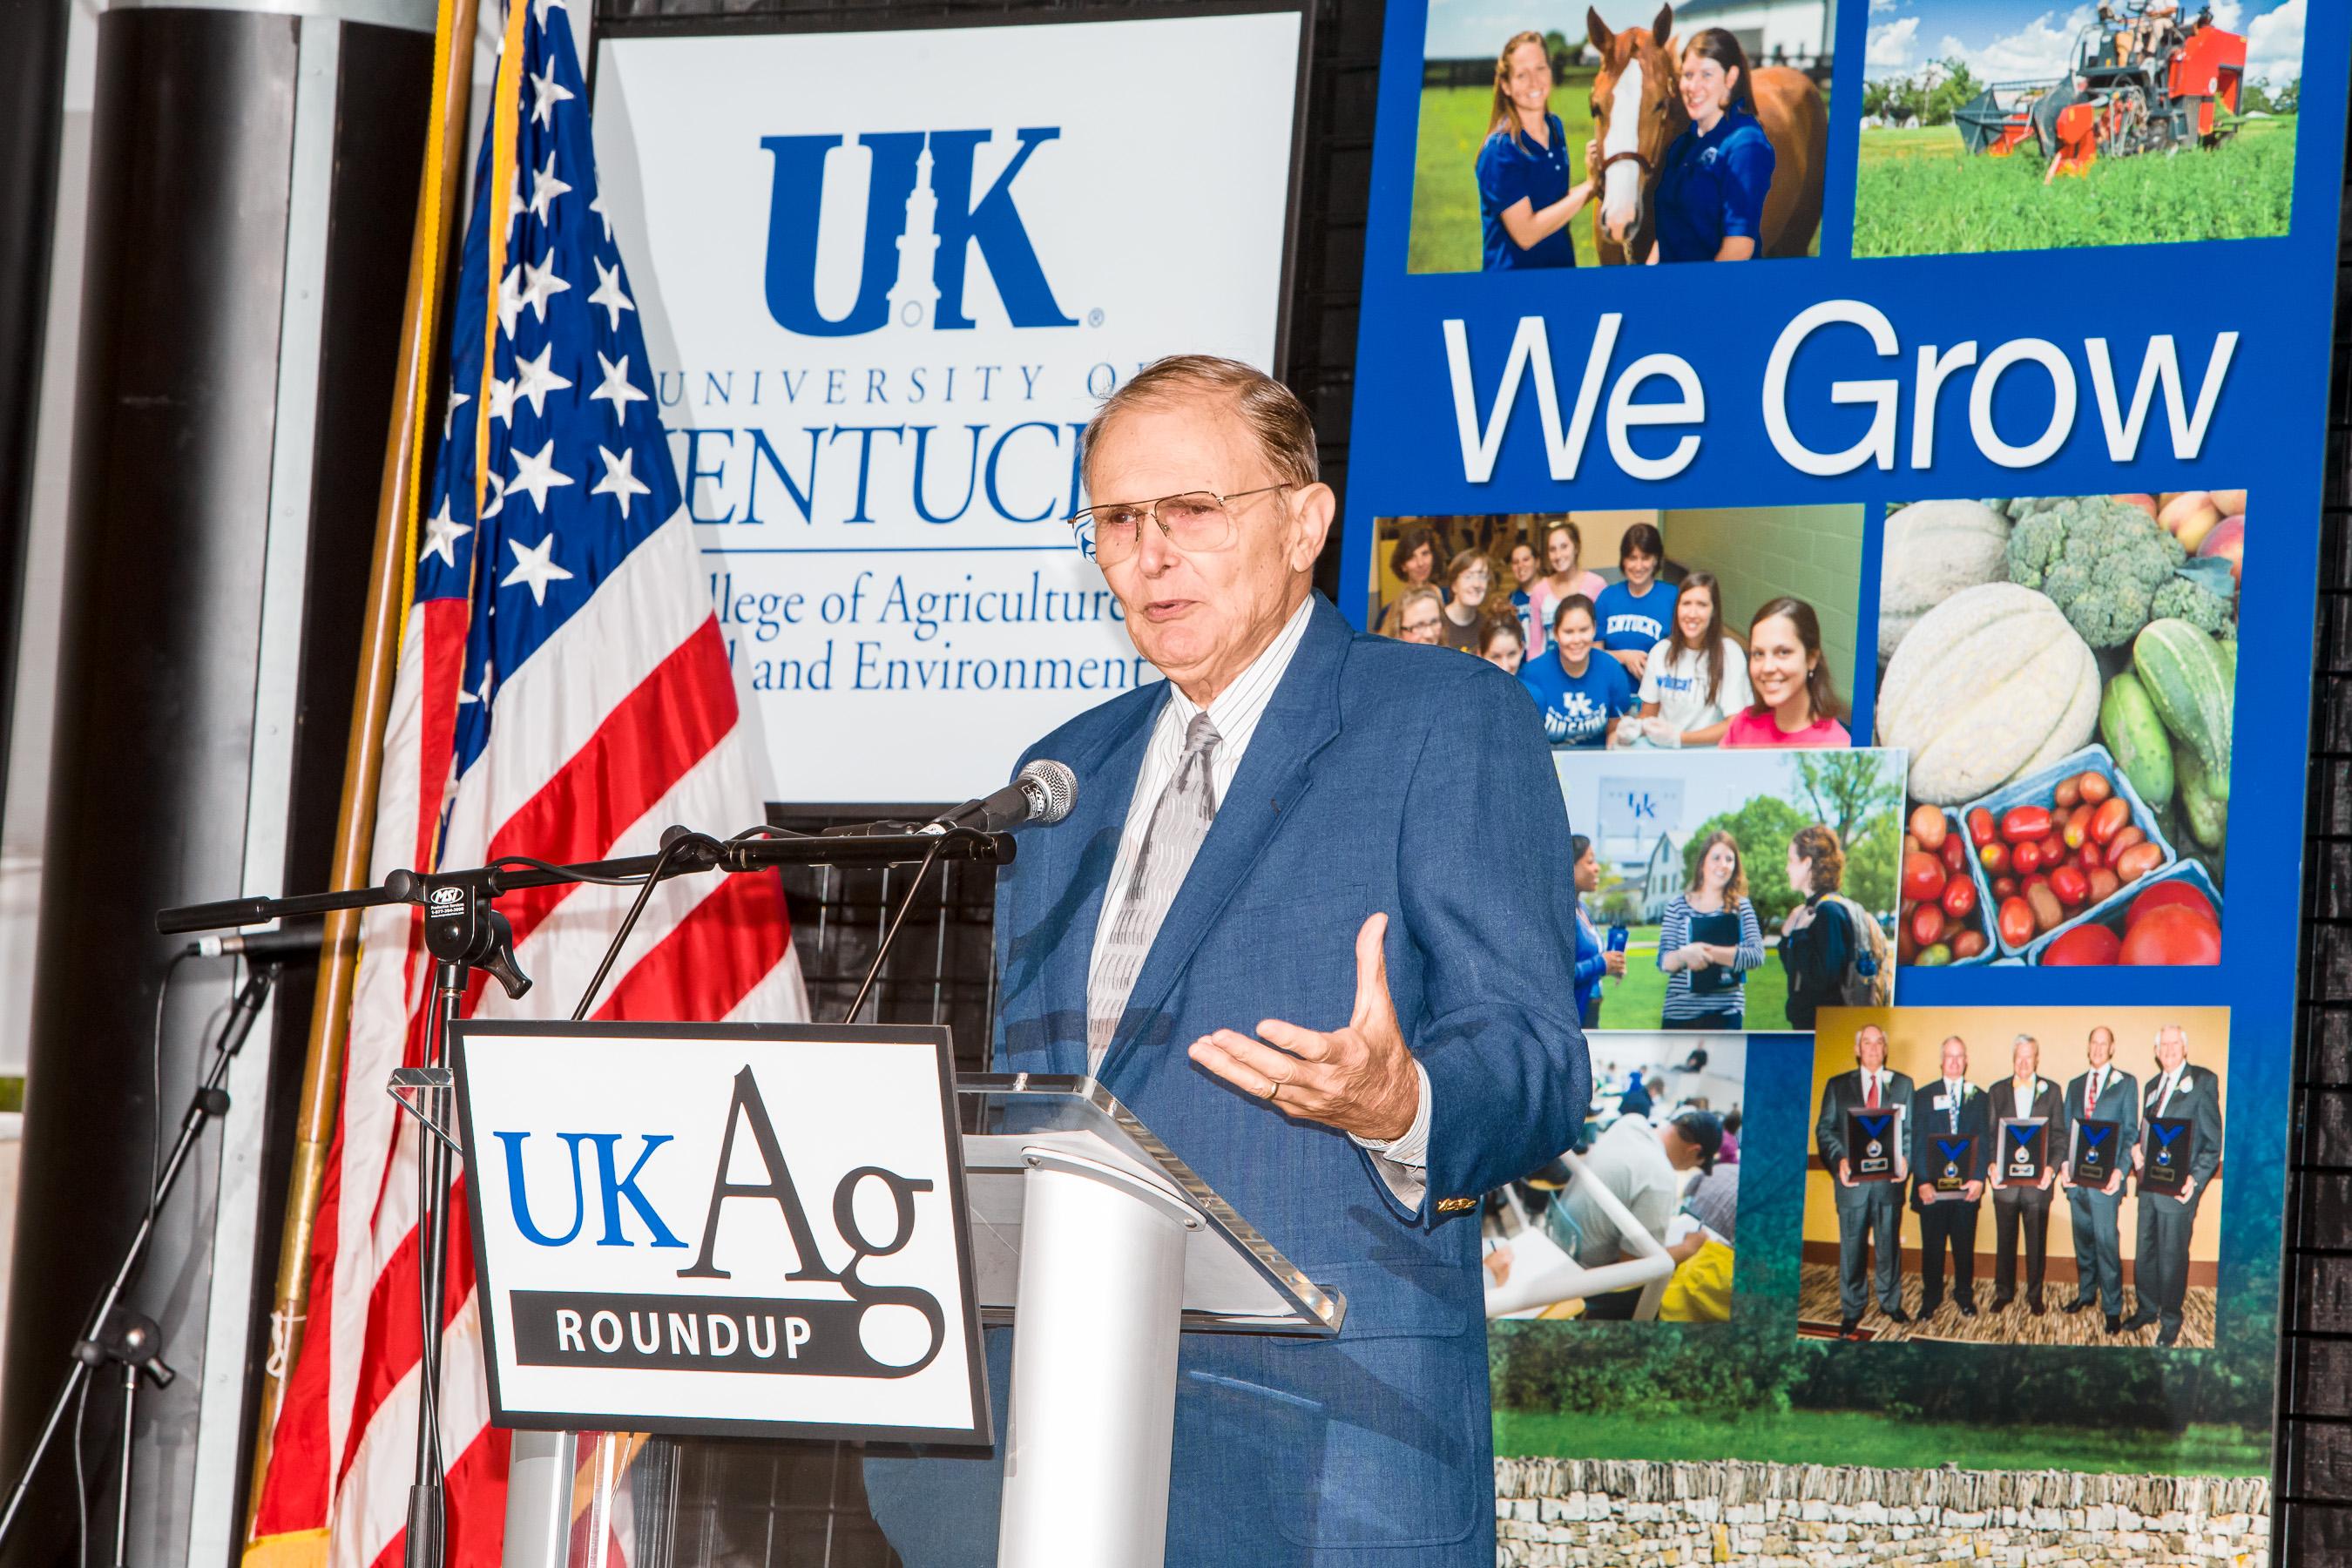  C. Oran Little, retired dean of the University of Kentucky College of Agriculture, Food and Environment